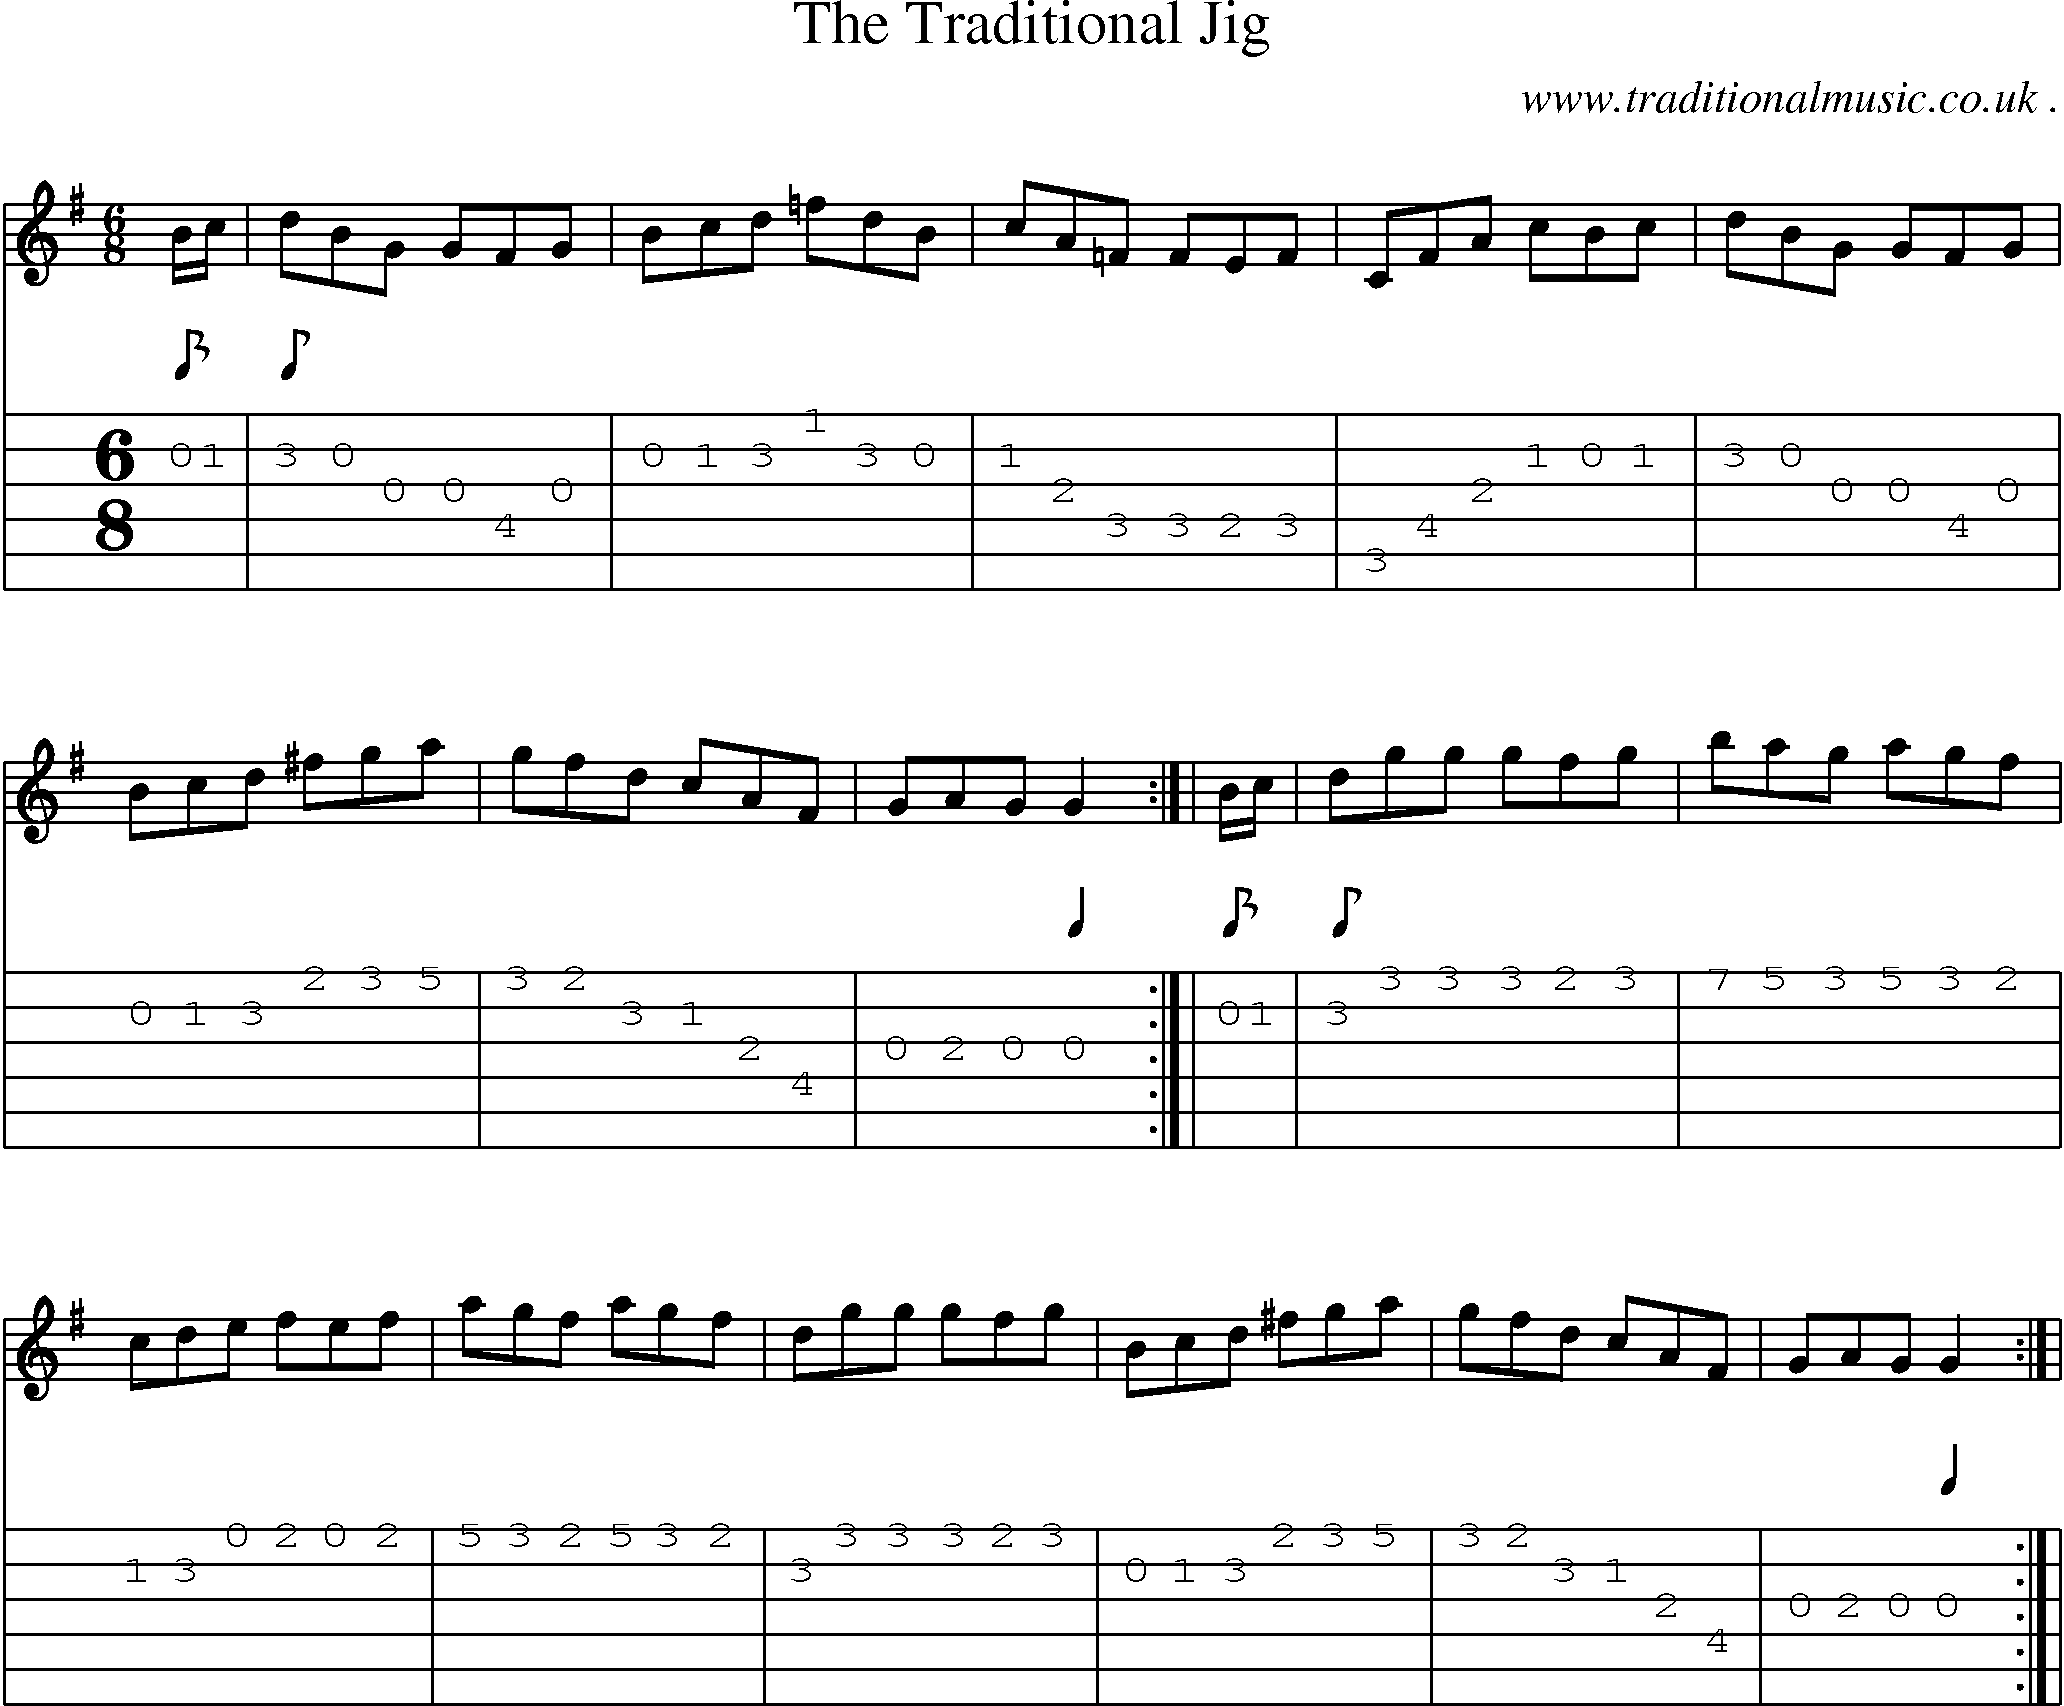 Sheet-Music and Guitar Tabs for The Traditional Jig